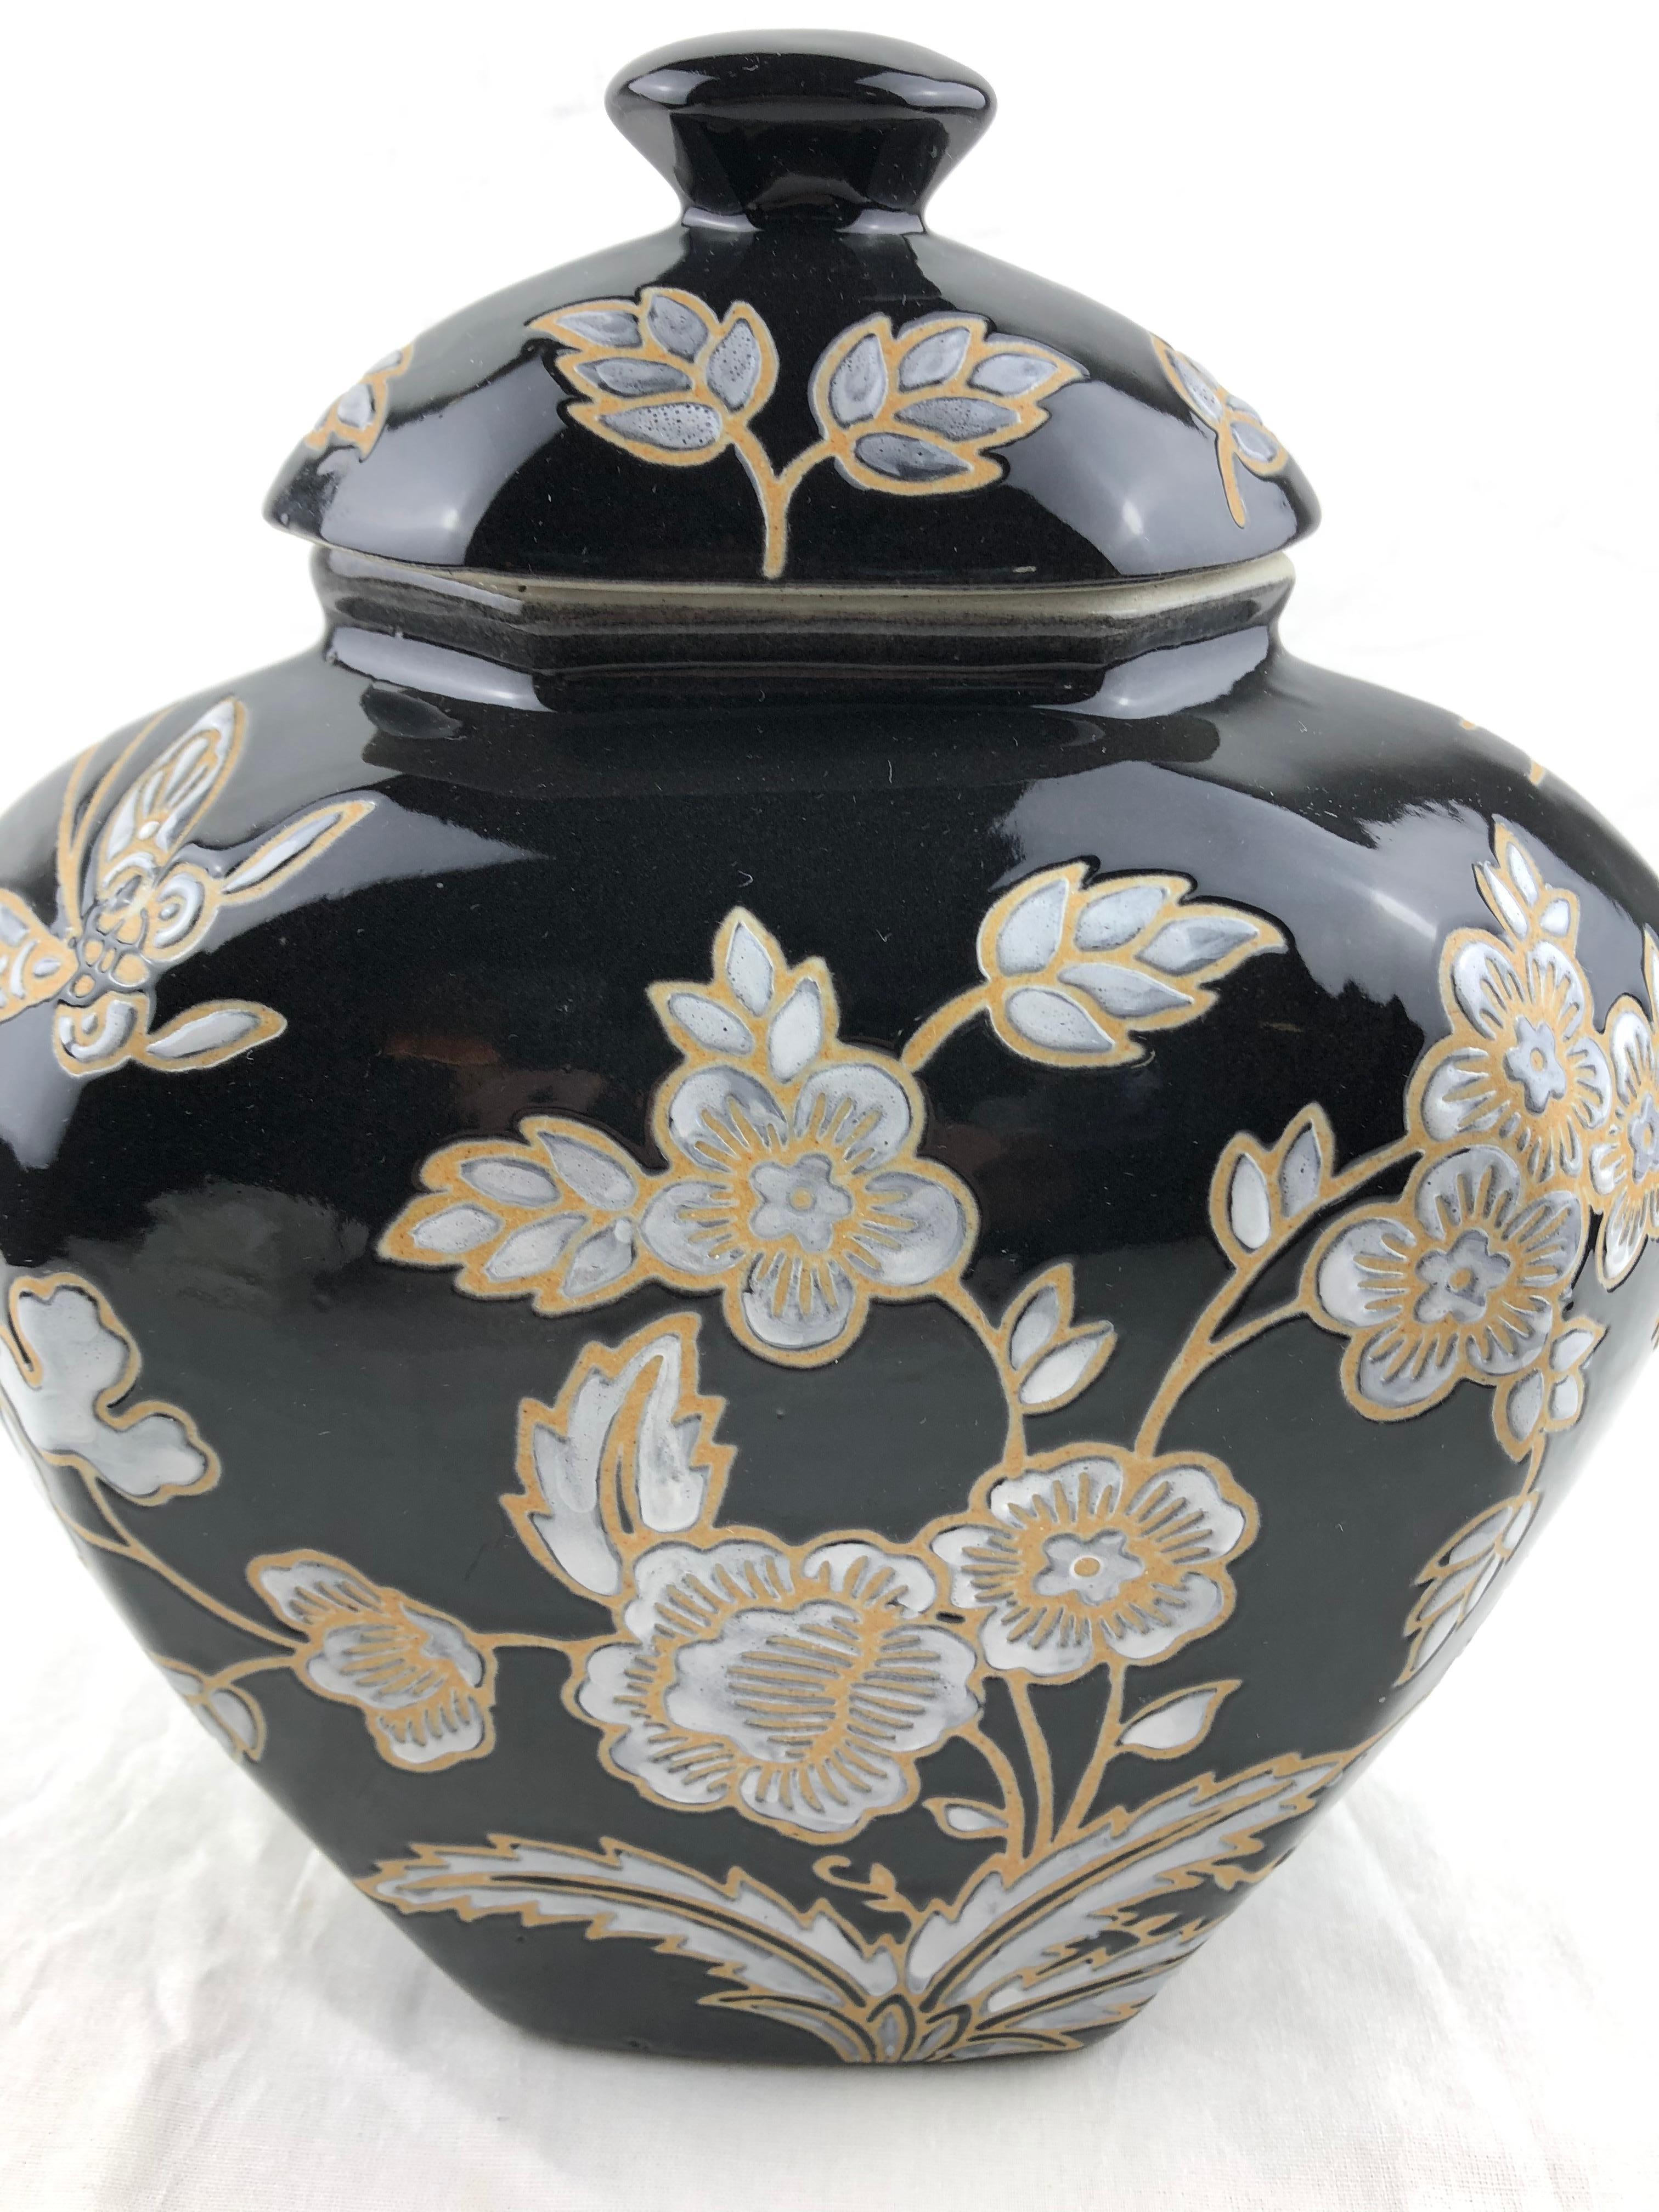 A lovely lidded French Majolica porcelain jar with molded floral and foliage decor. 
This very good quality piece is handcrafted with great details throughout. 

This Majolica jar boasts a lovely black body adorned with delicately molded flowers,